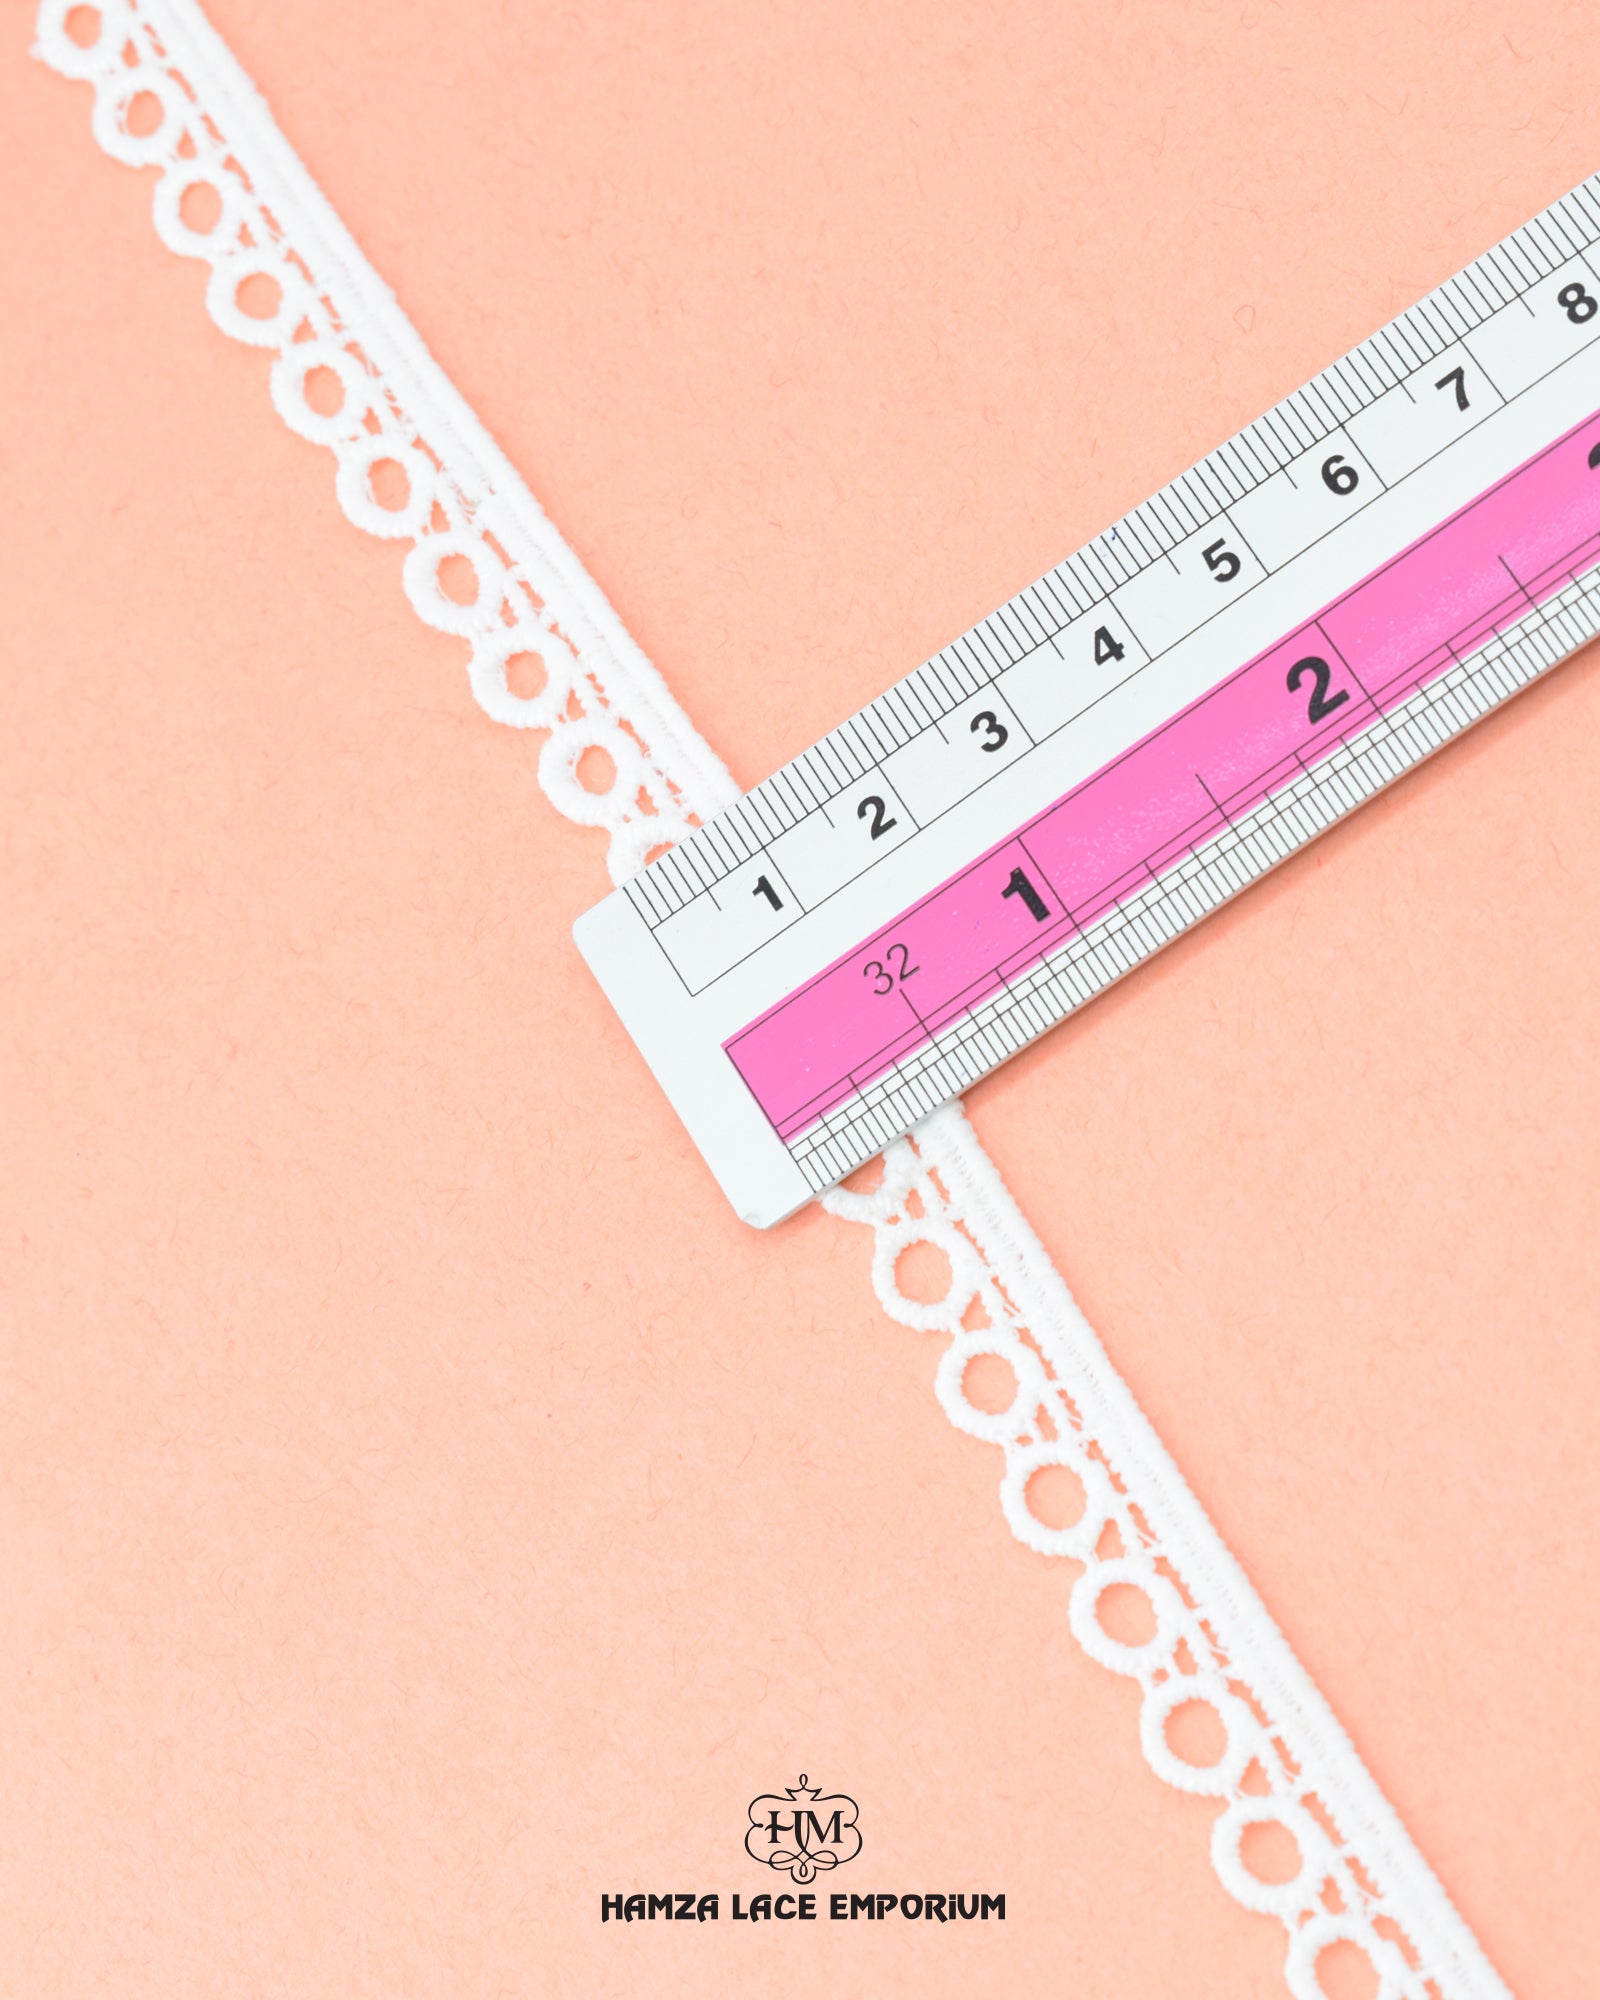 Size of the 'Edging Ring Lace 23388' is shown as '0.5' inches with the help of a ruler